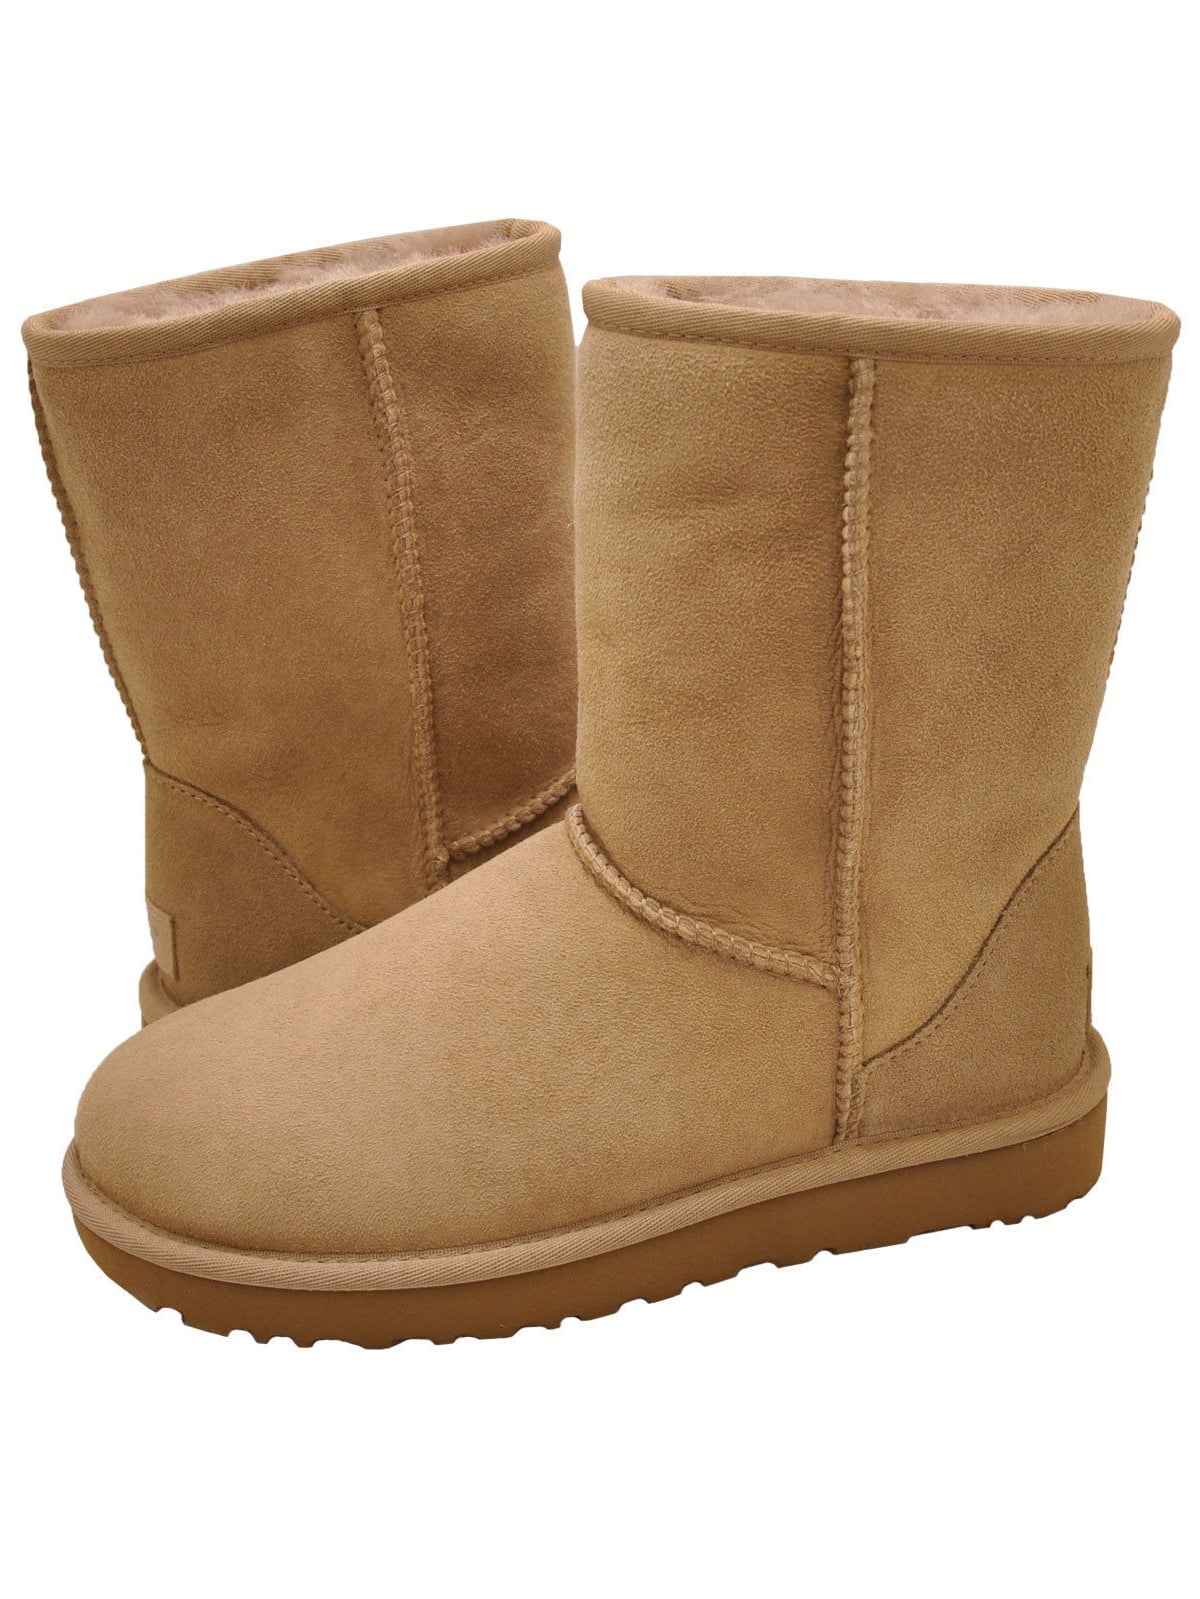 fawn color uggs